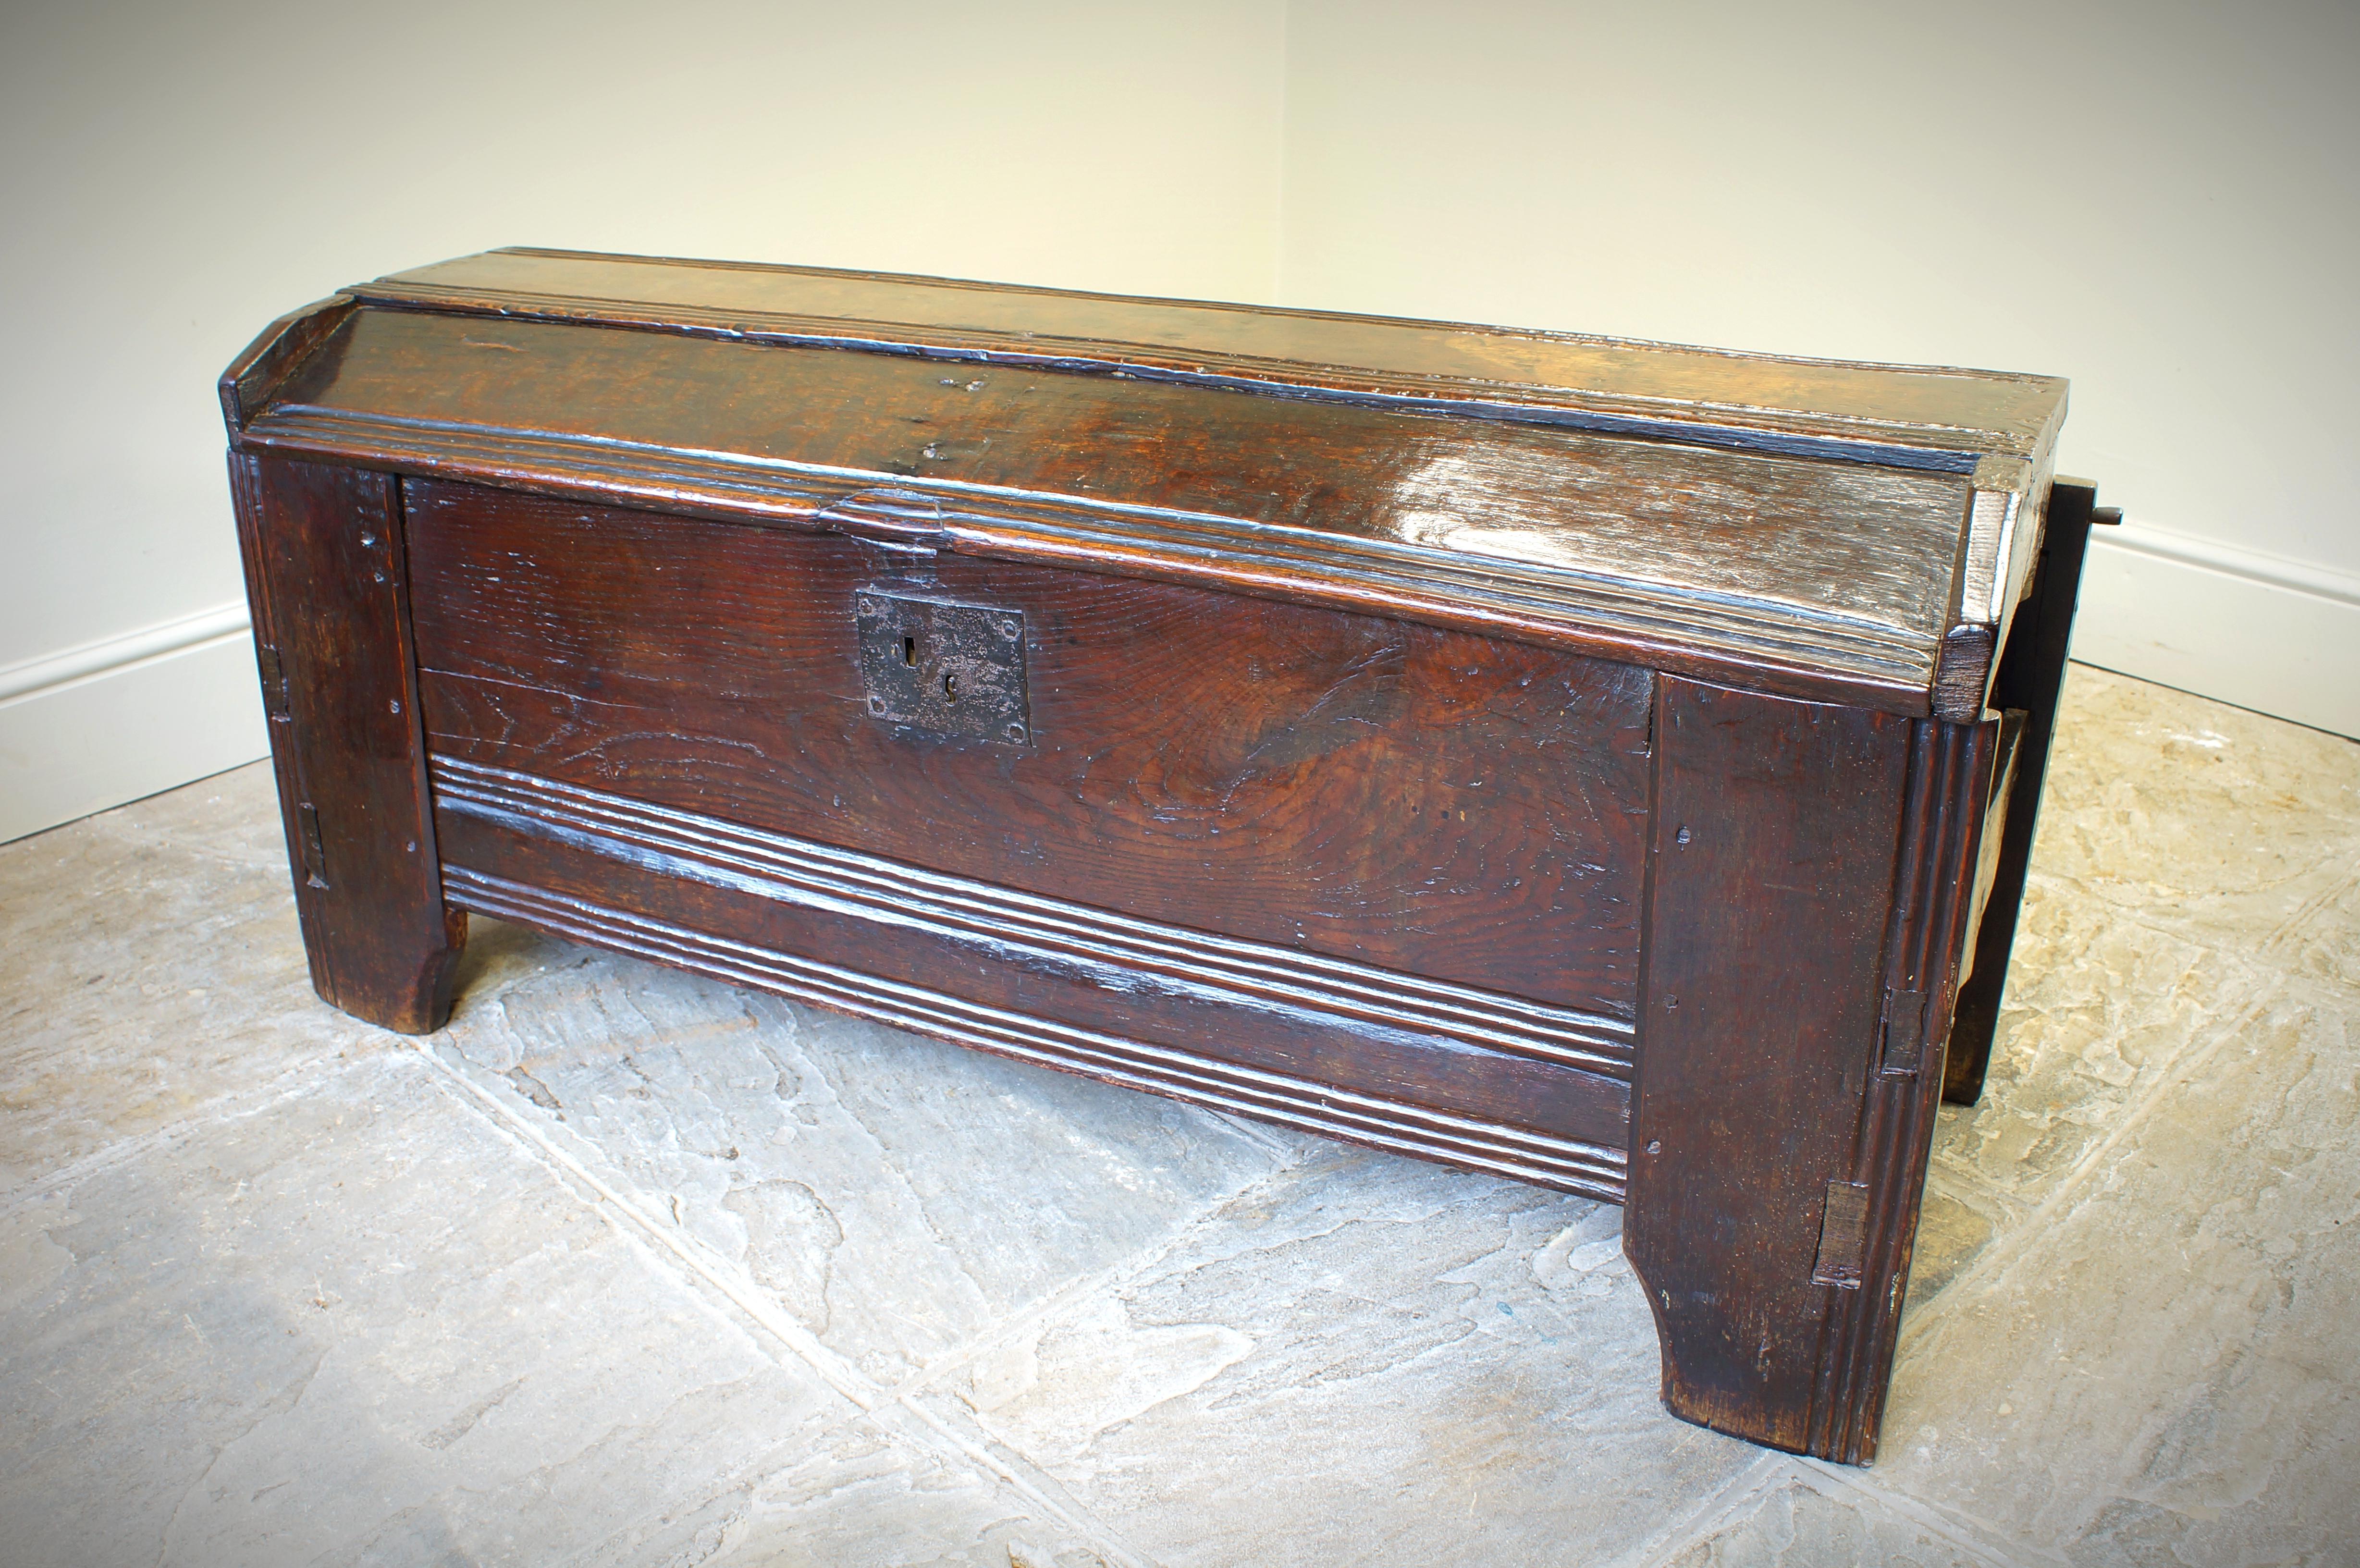 A 16th Century Boarded Oak Clamp-front Chest Or Ark, Welsh Borders, Circa 1550 For Sale 11